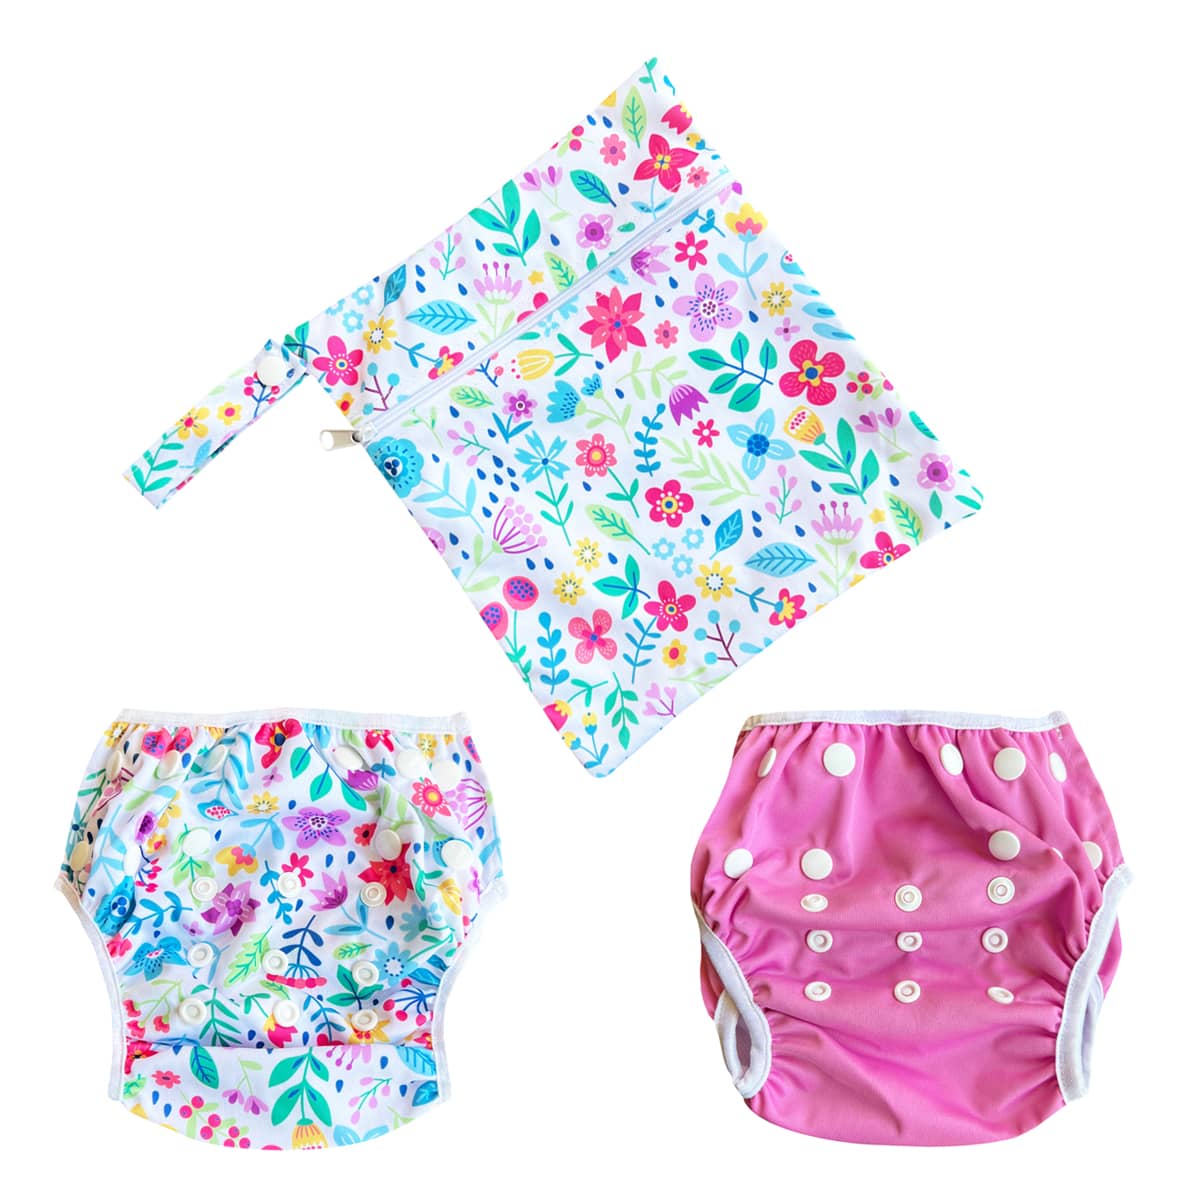 TicTasTogs Reusable Swim Nappy Set - Twin Pack + Wetbag - Ditsy Daisy